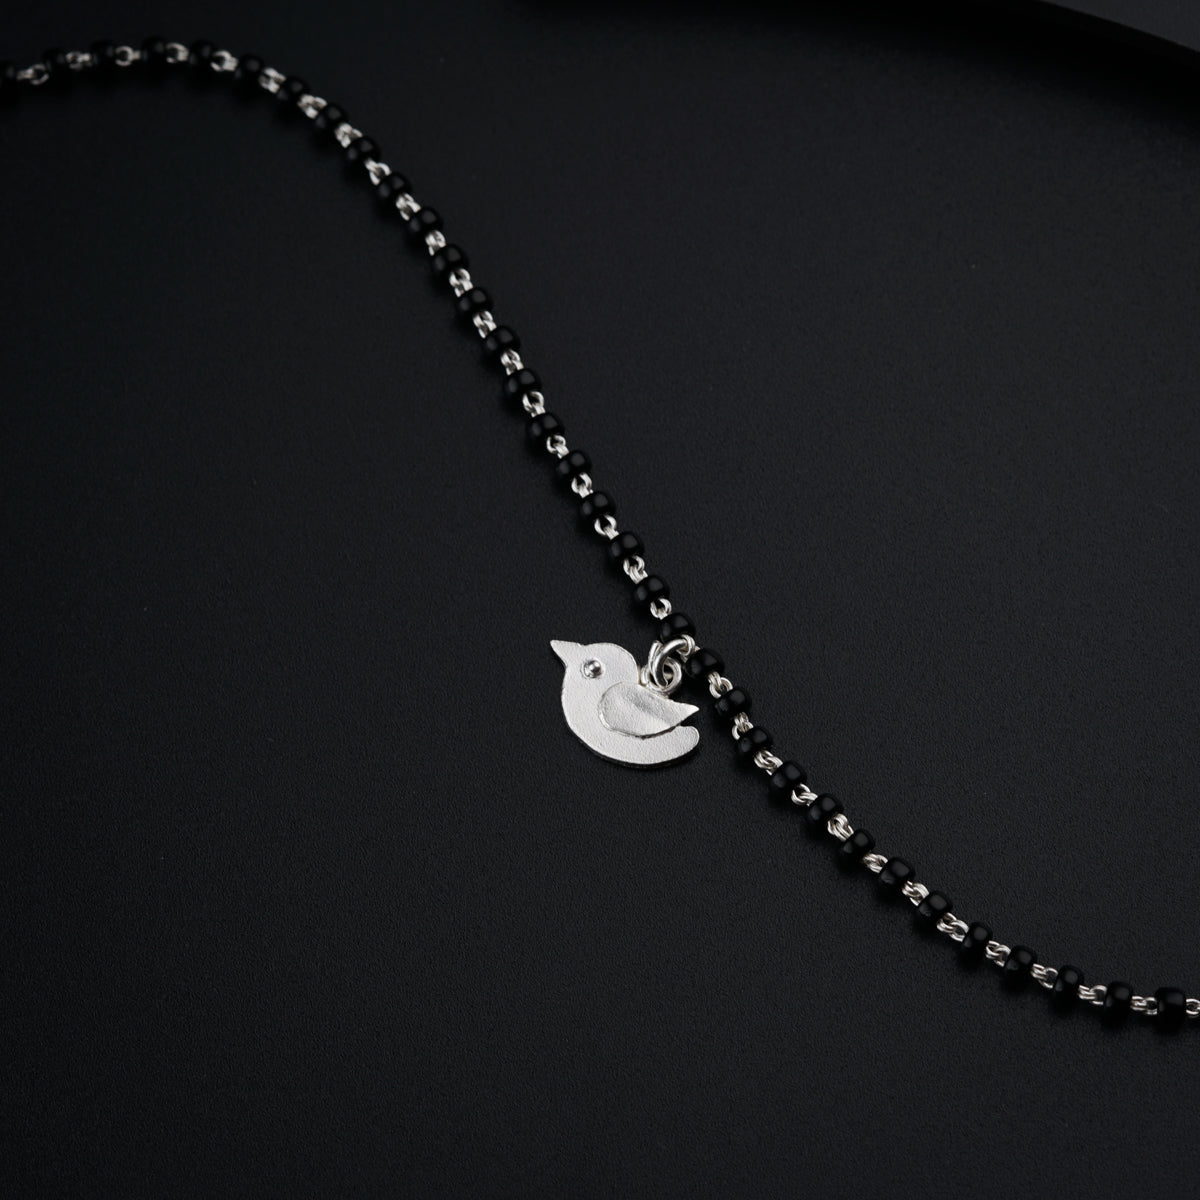 a necklace with a bird on it on a black surface